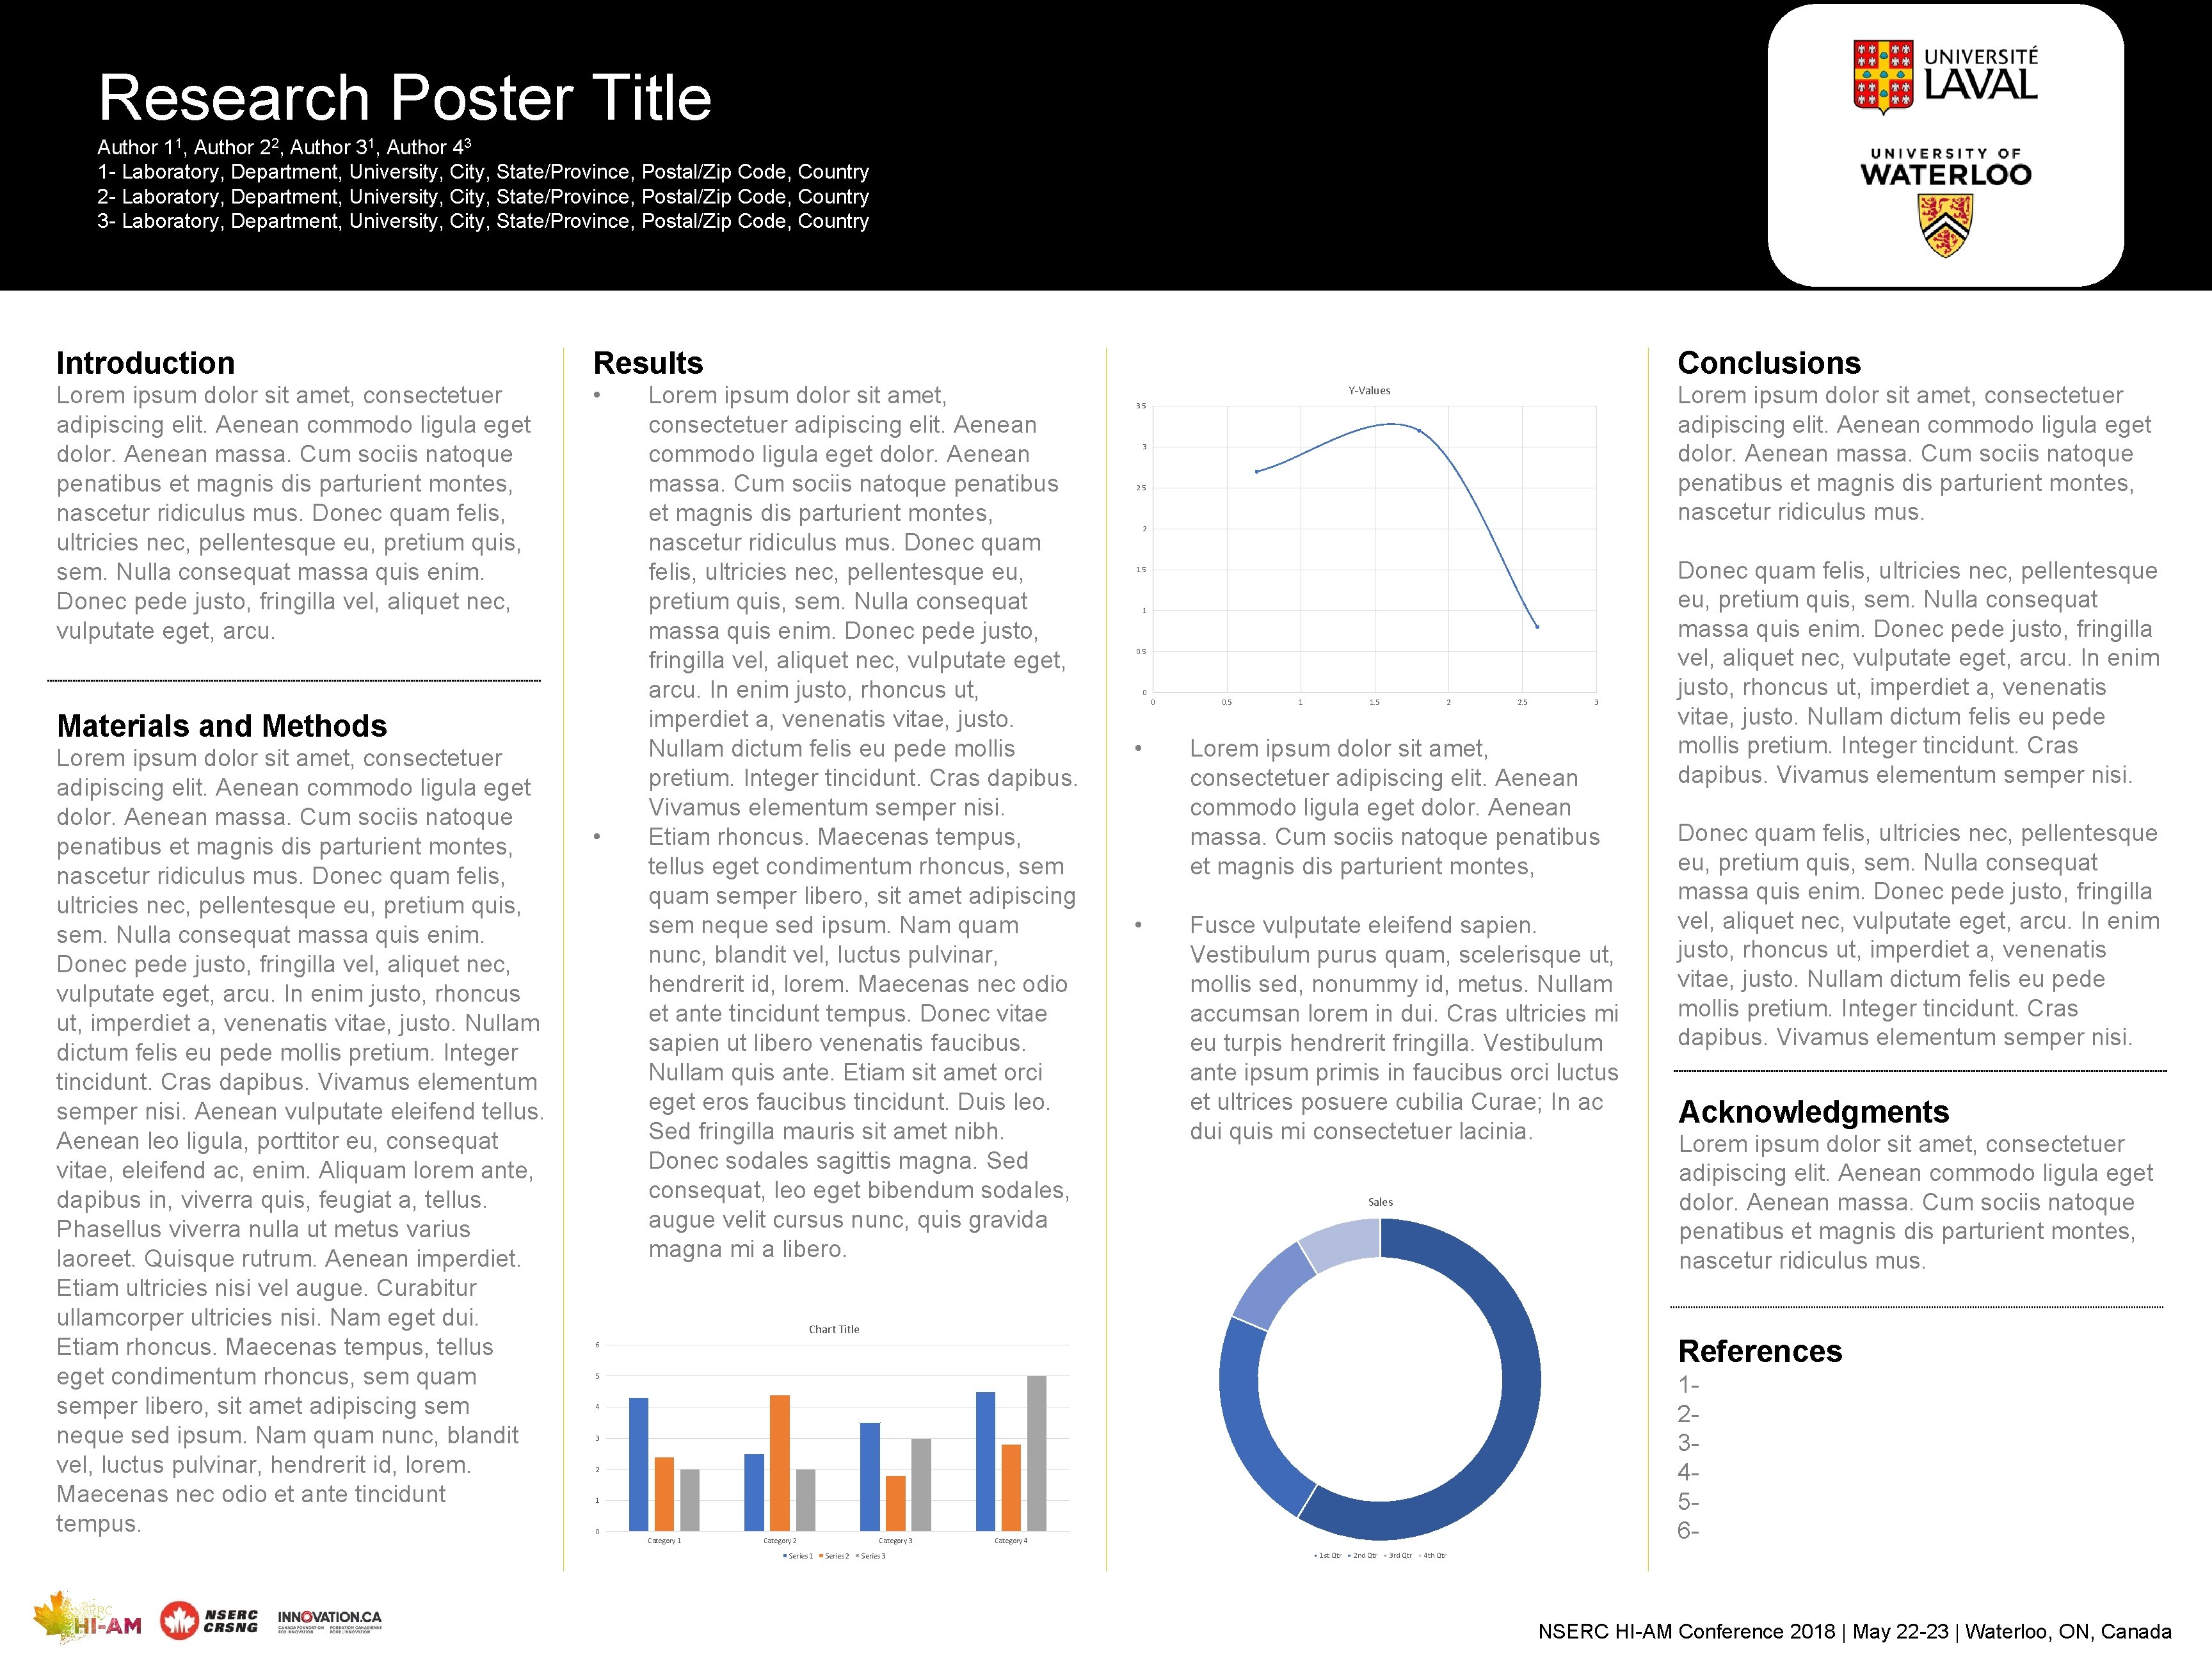 Research Poster Title Author 11, Author 22, Author 31, Author 43 1 - Laboratory,